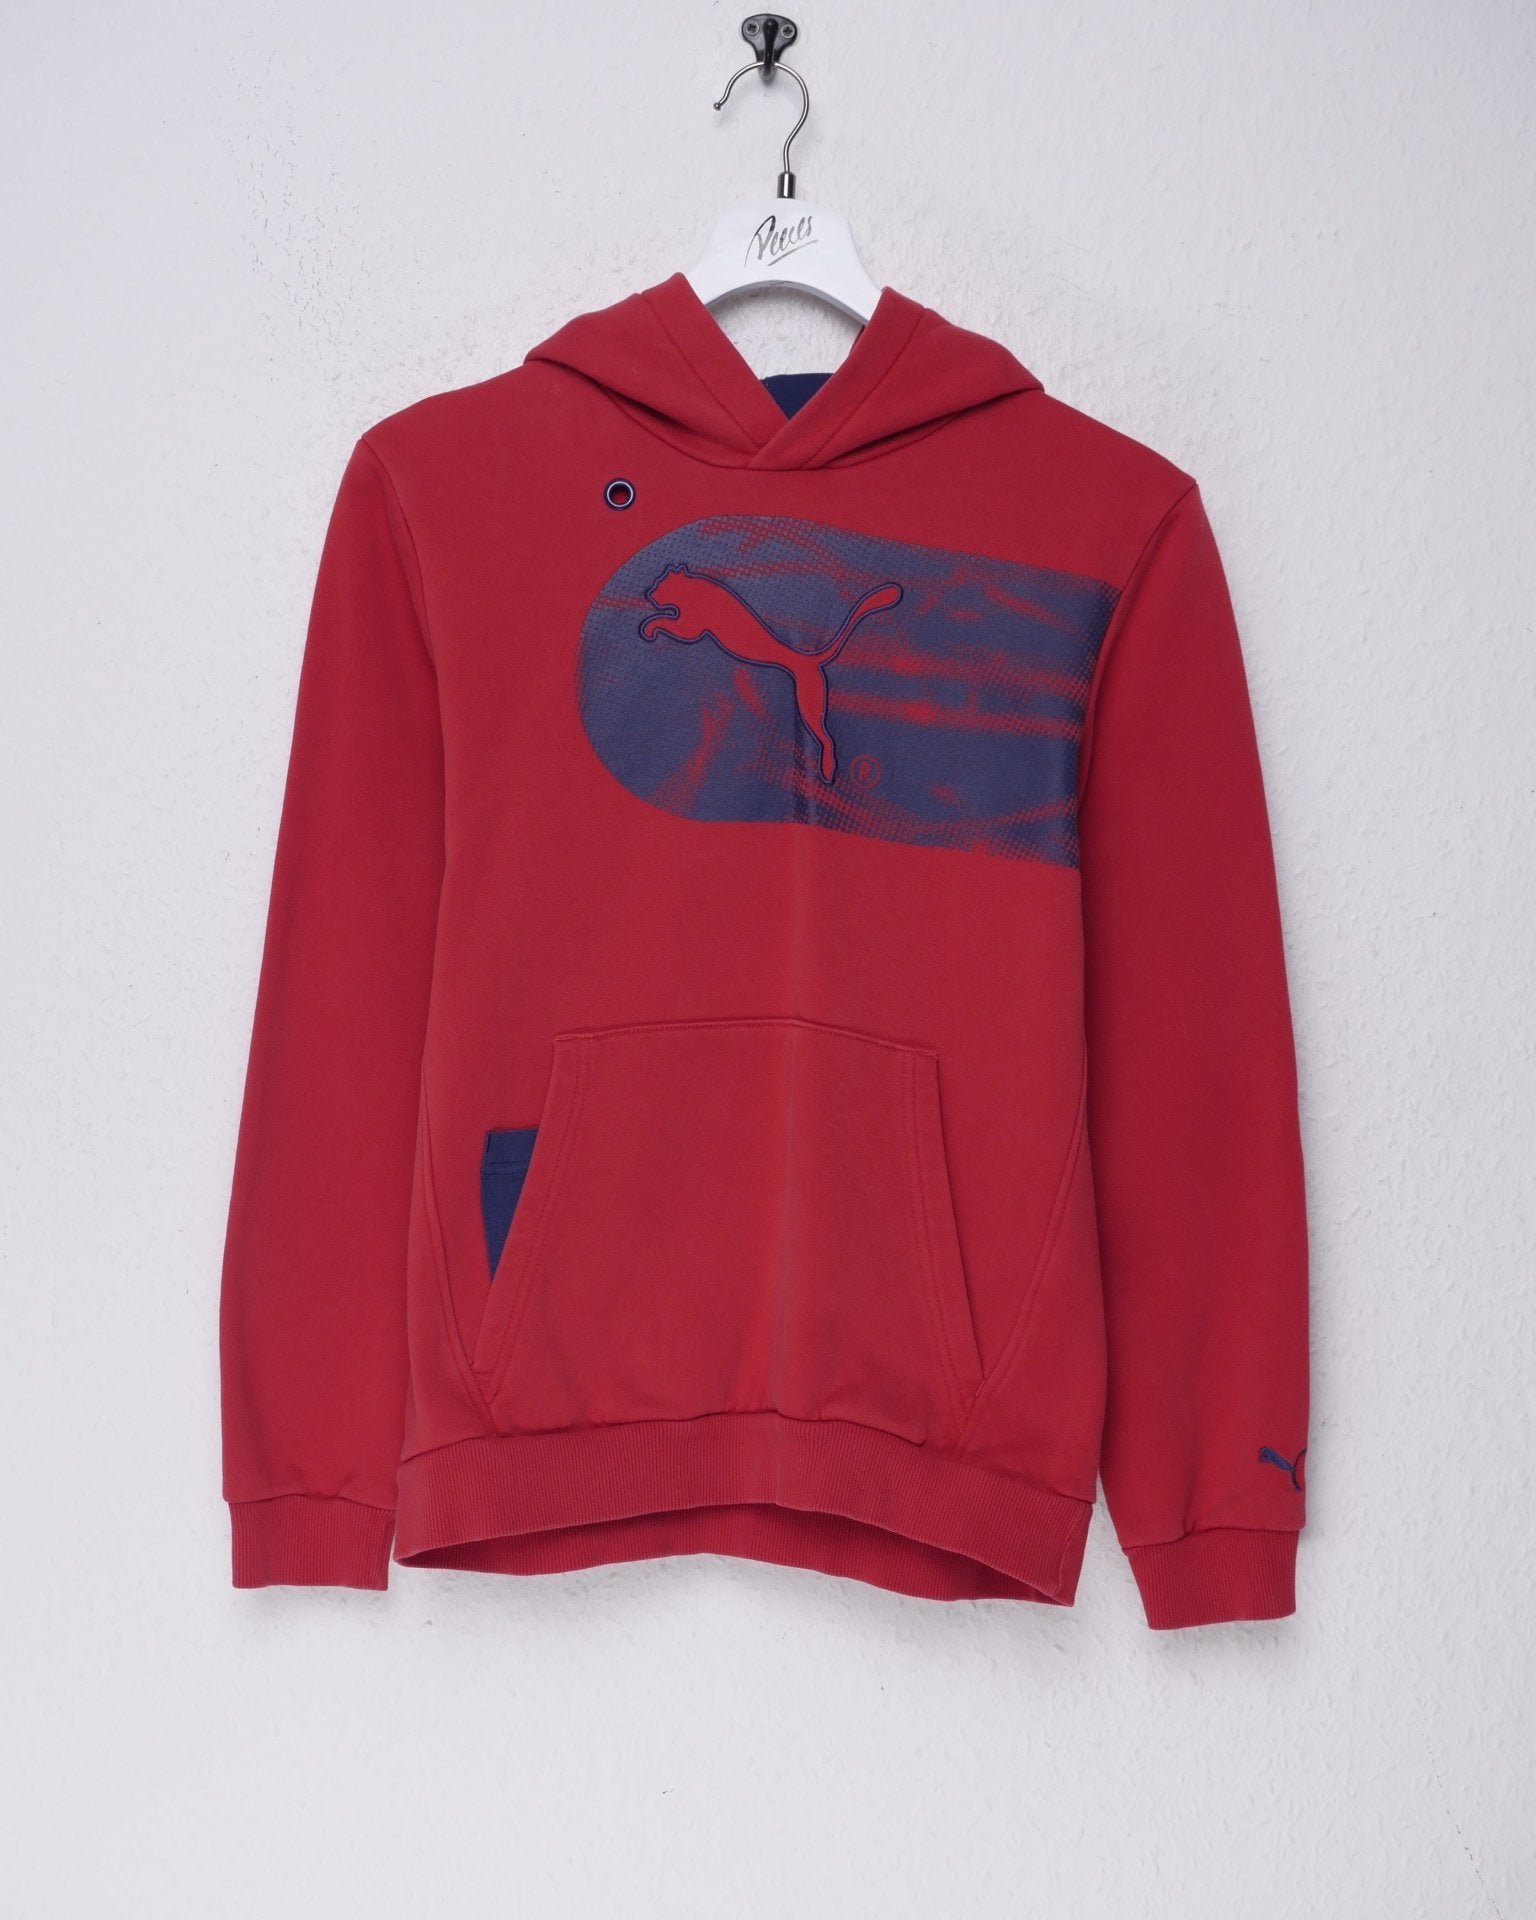 Puma embroidered Logo red Hoodie - Peeces